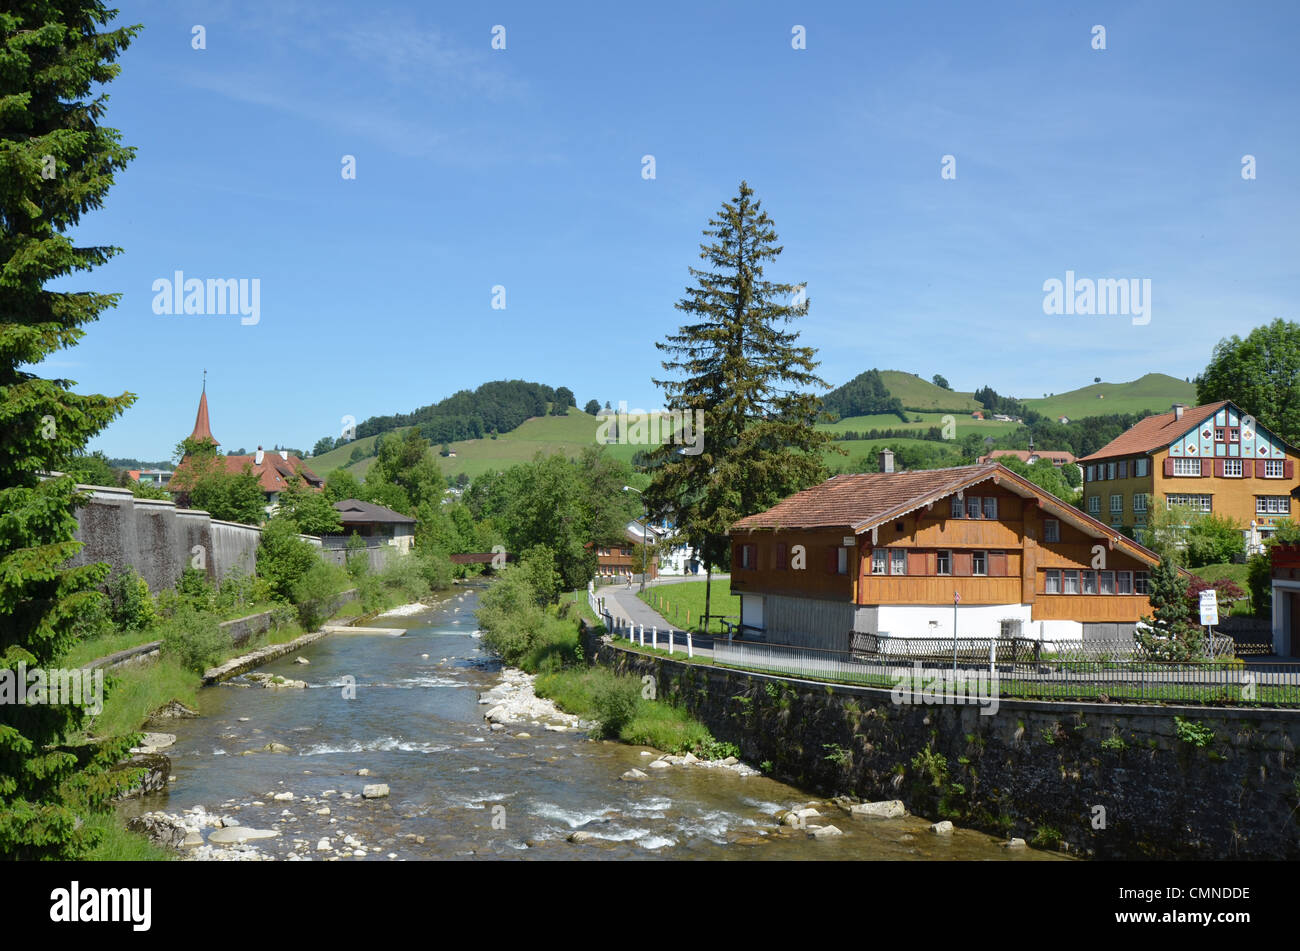 Image of the countryside of Appenzell, Switzerland. Stock Photo